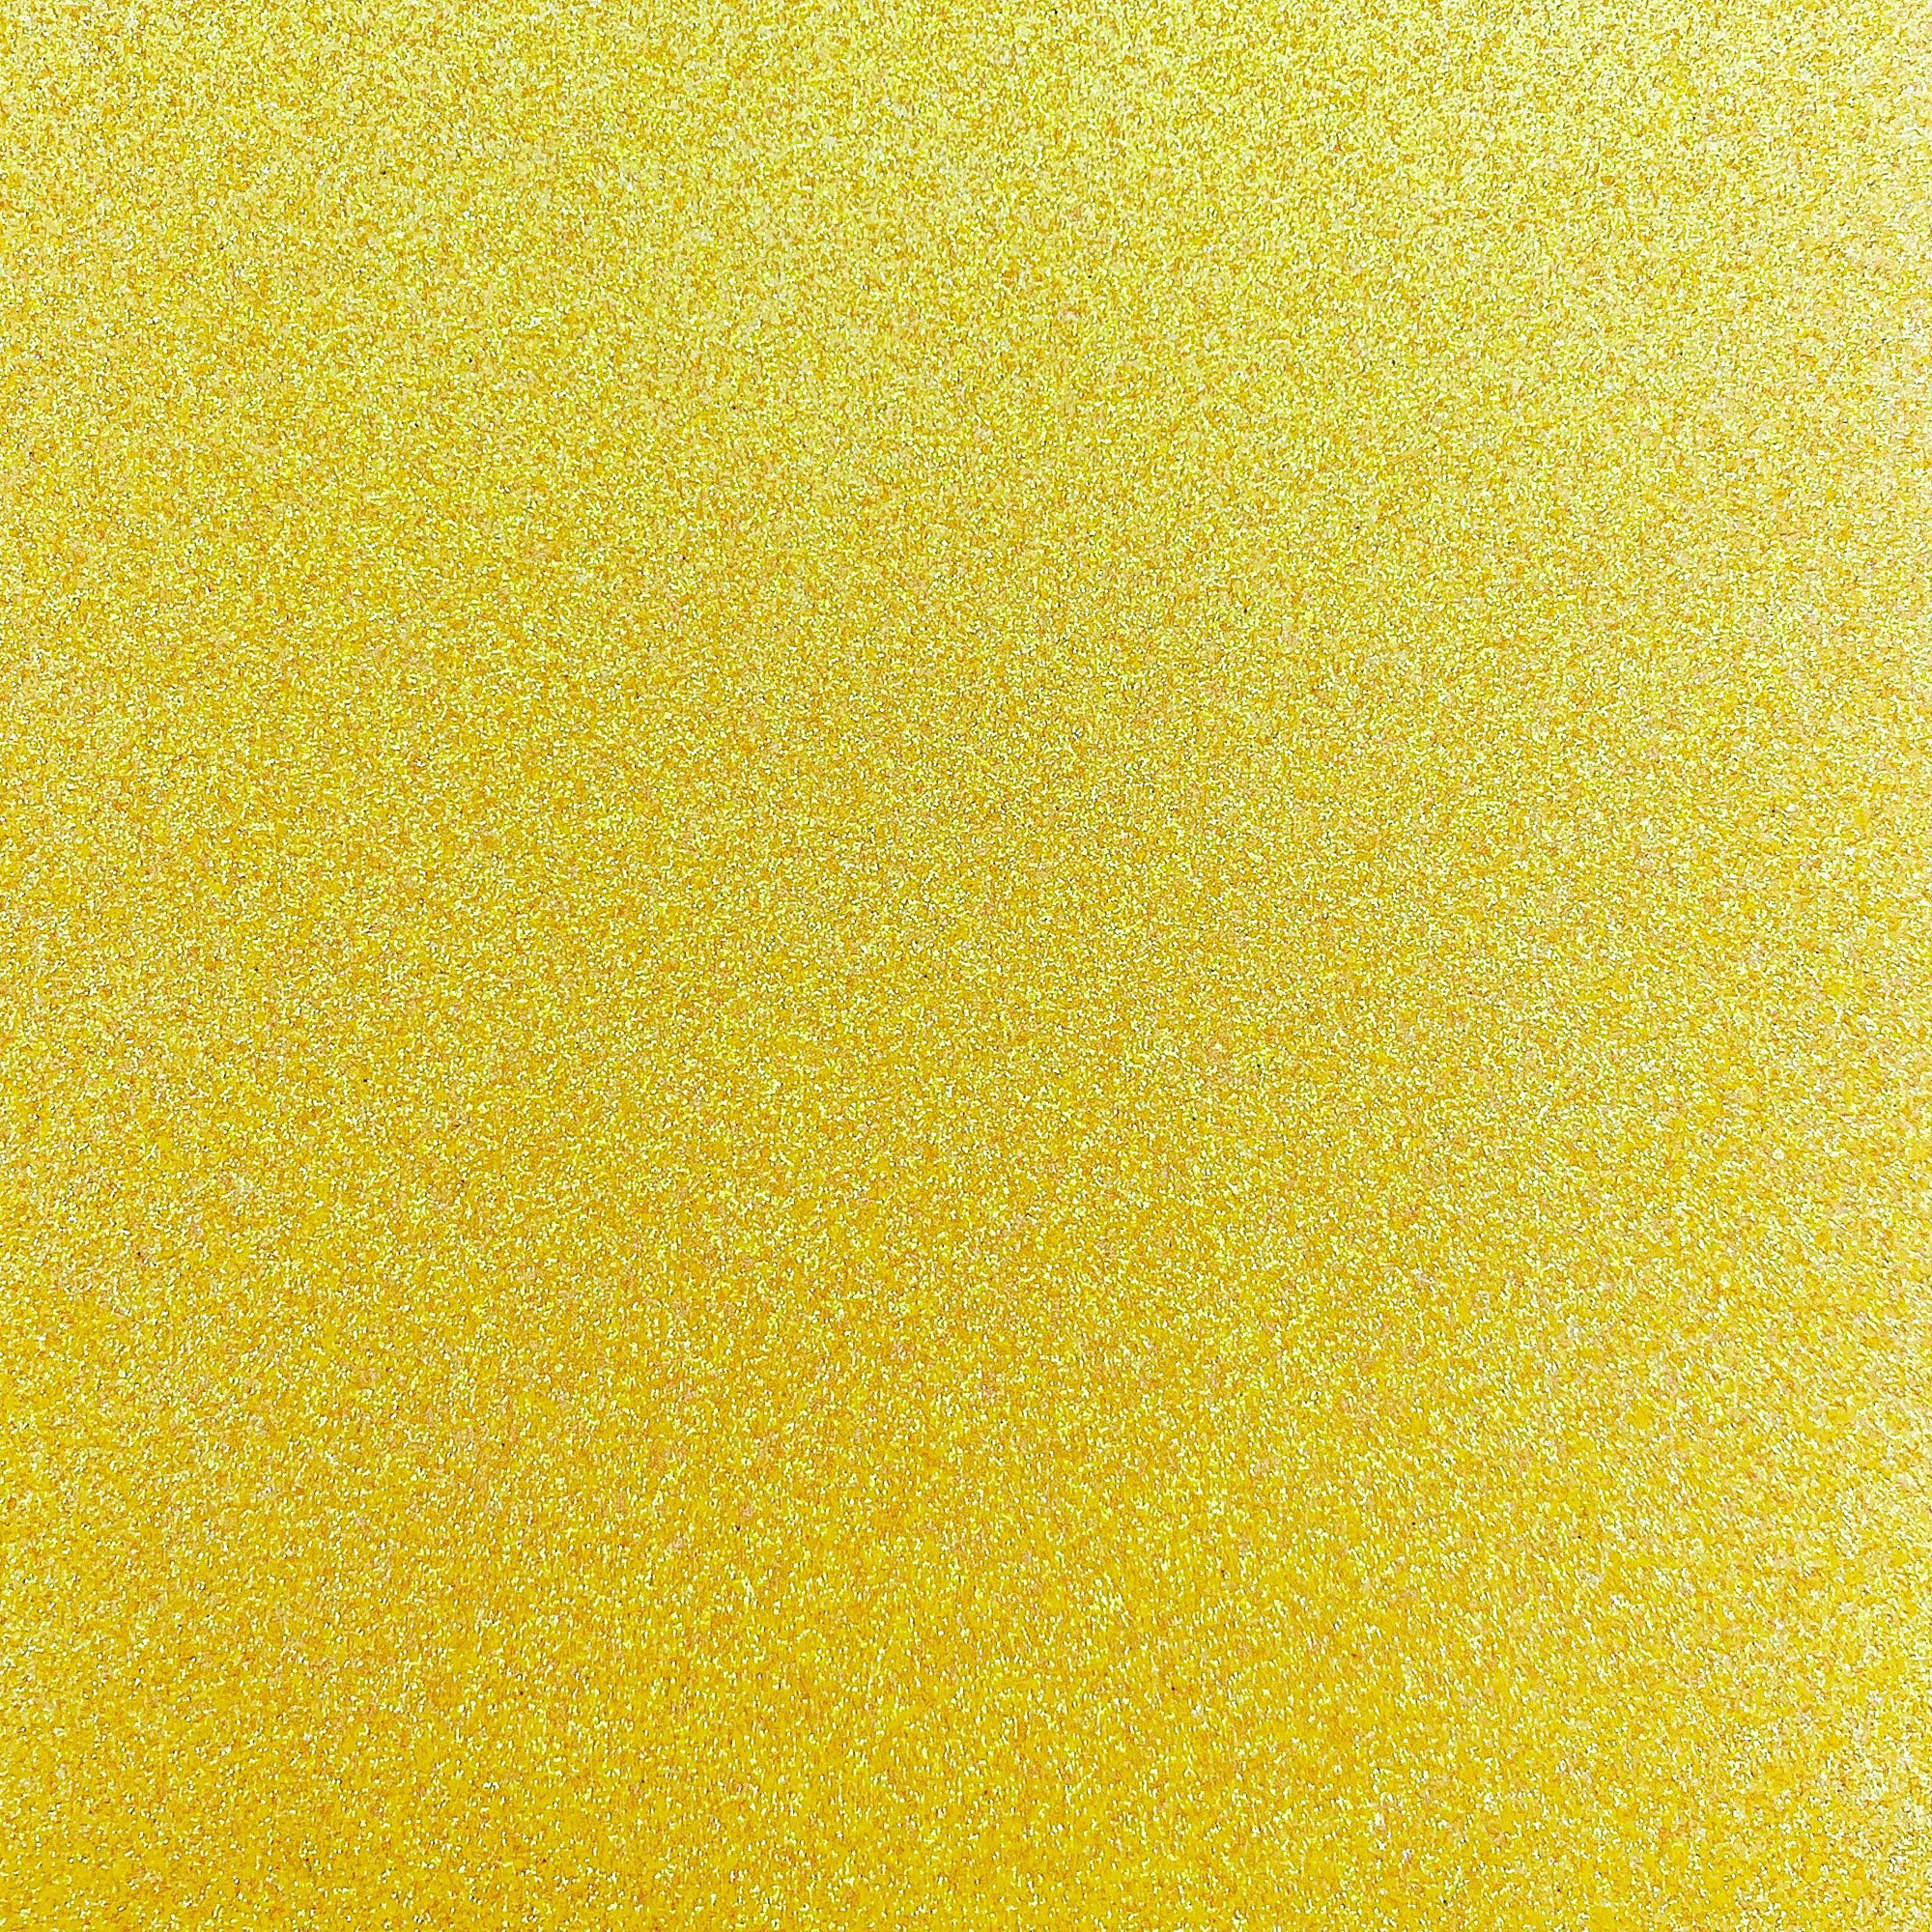 Glitter Yellow Cardstock - 8.5 x 11 inch - .016 Thick - 20 Sheets - Clear  Path Paper